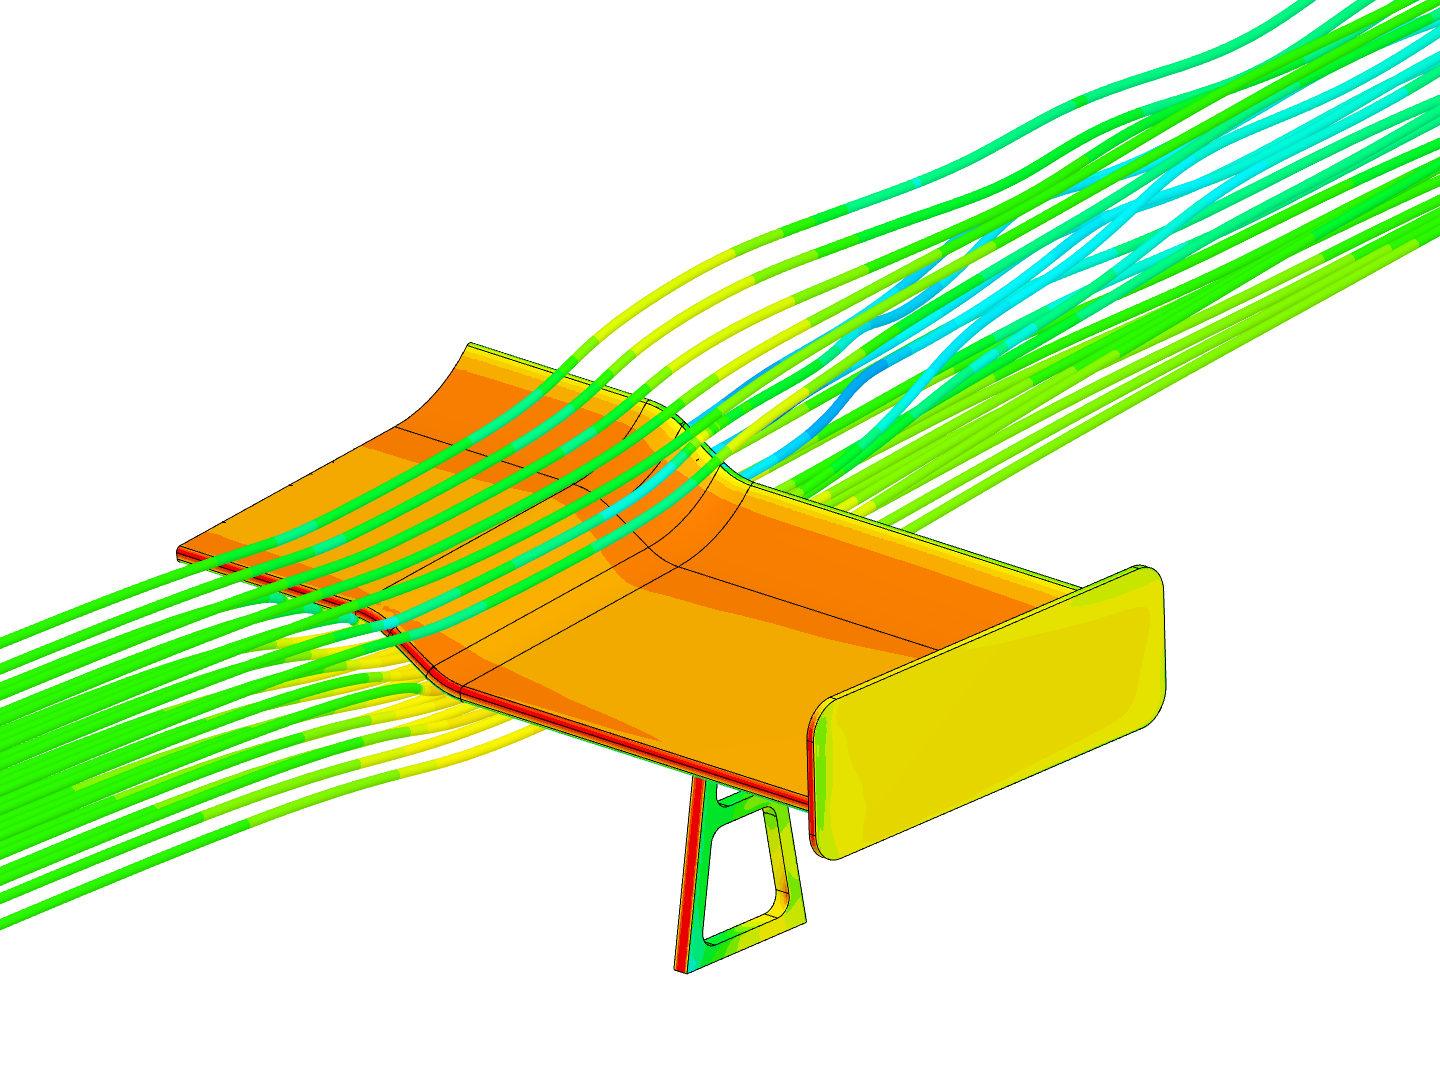 GT wing image